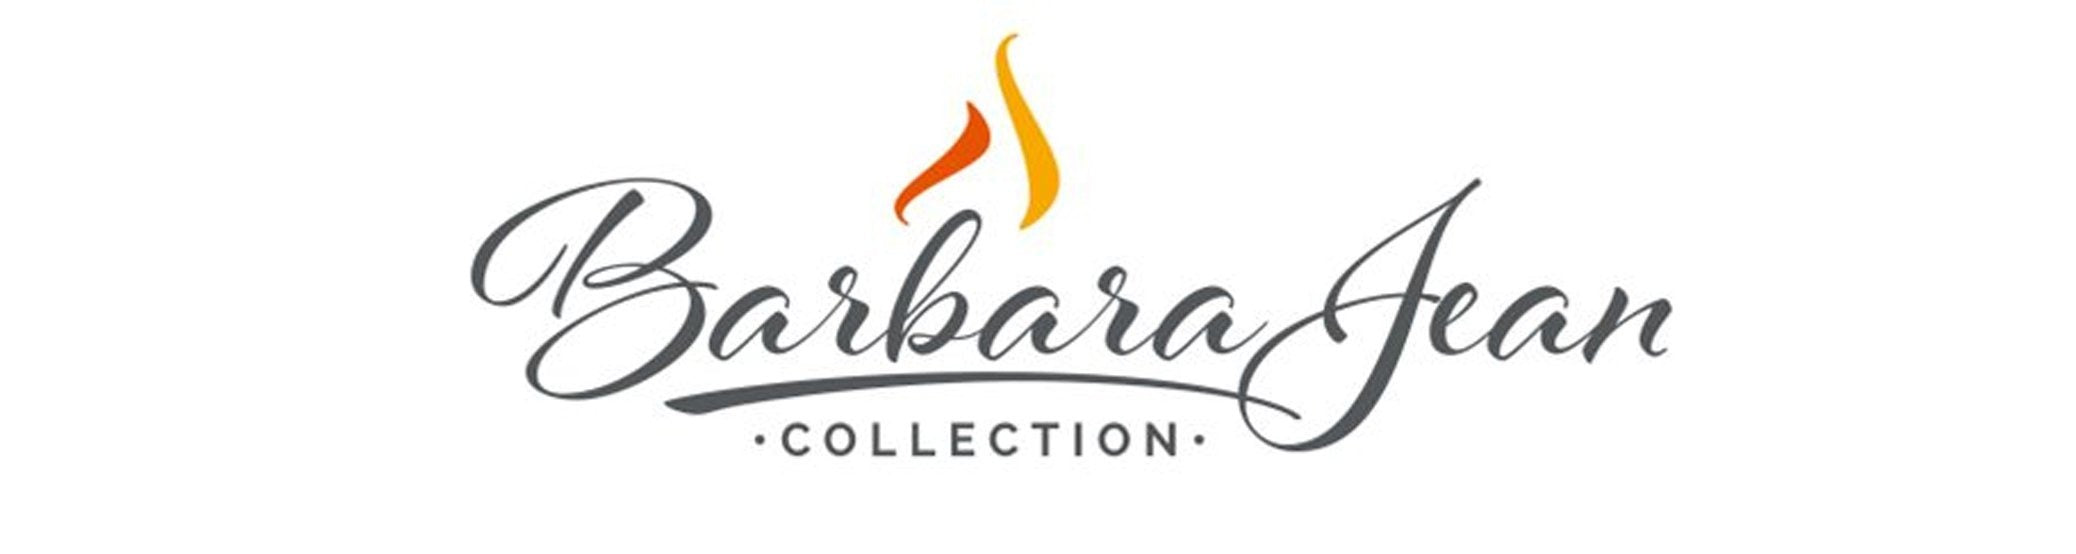 Barbara Jean Collection - Recreation Outfitters